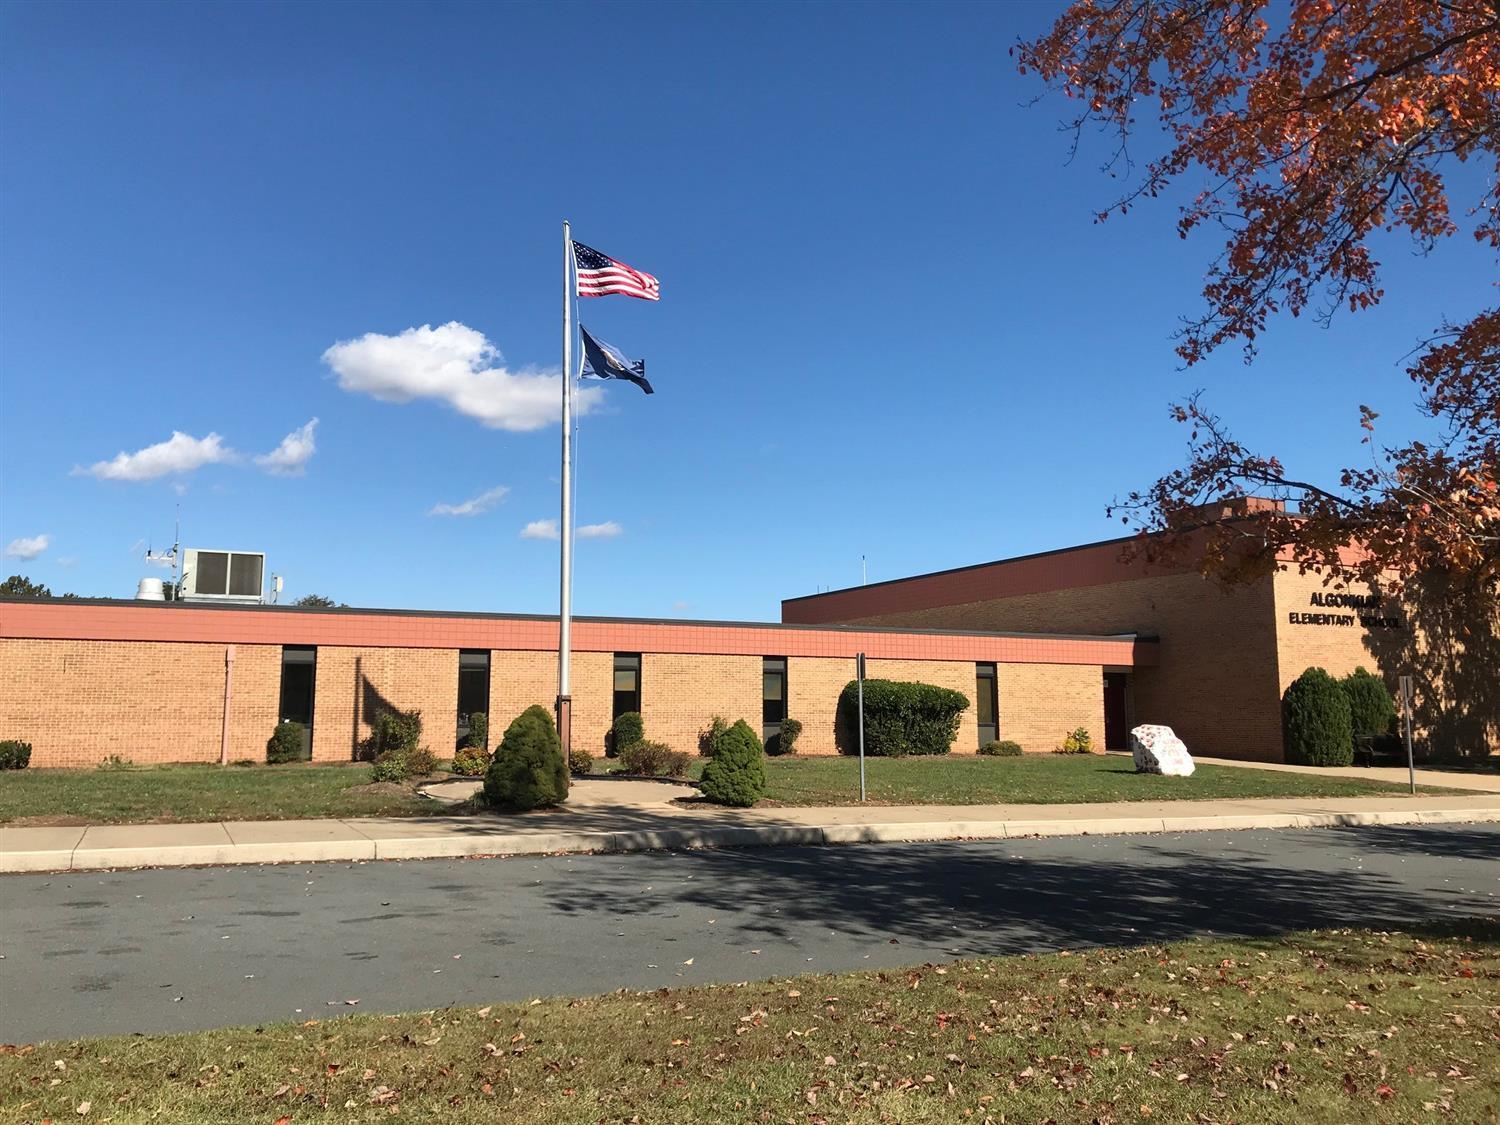 outside algonkian elementary school building with a flag pole in front 